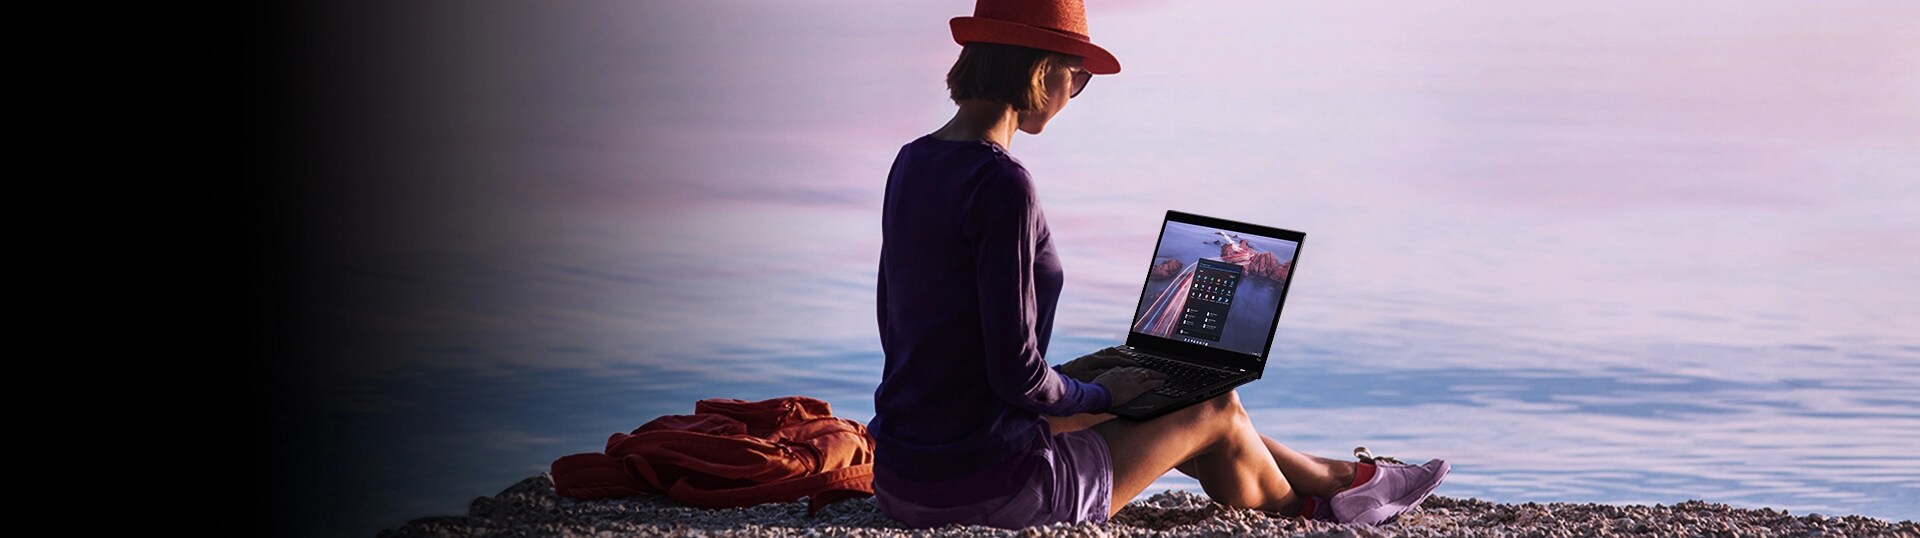 Lady sitting by water with laptop in lap.